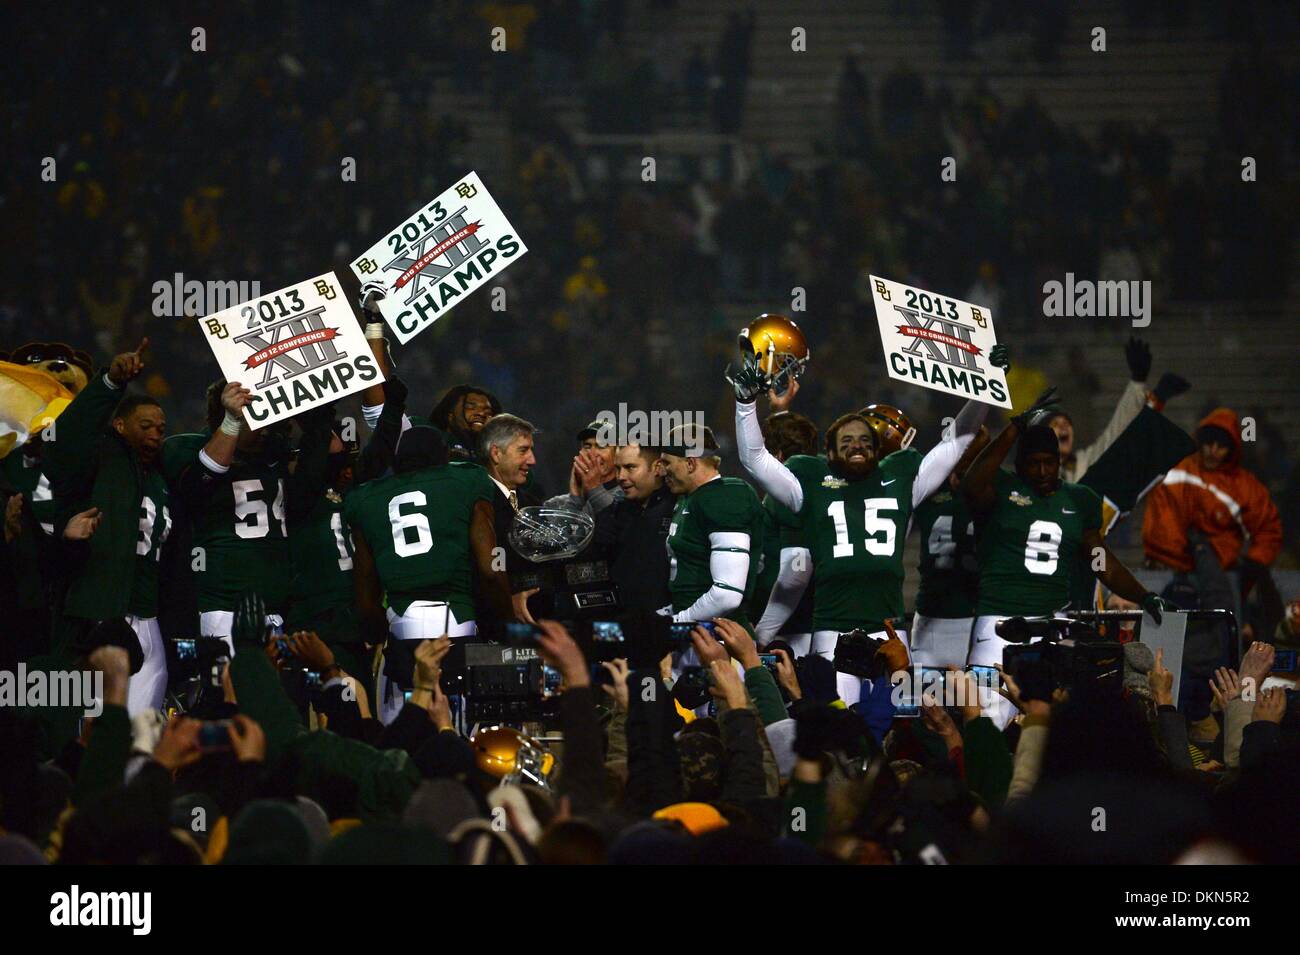 Dec 7, 2013. The Baylor Bears celebrate after defeating the Texas Longhorns at Floyd Casey Stadium in Waco Texas. Baylor defeats 30-10 to win the Big 12 Championship. Stock Photo